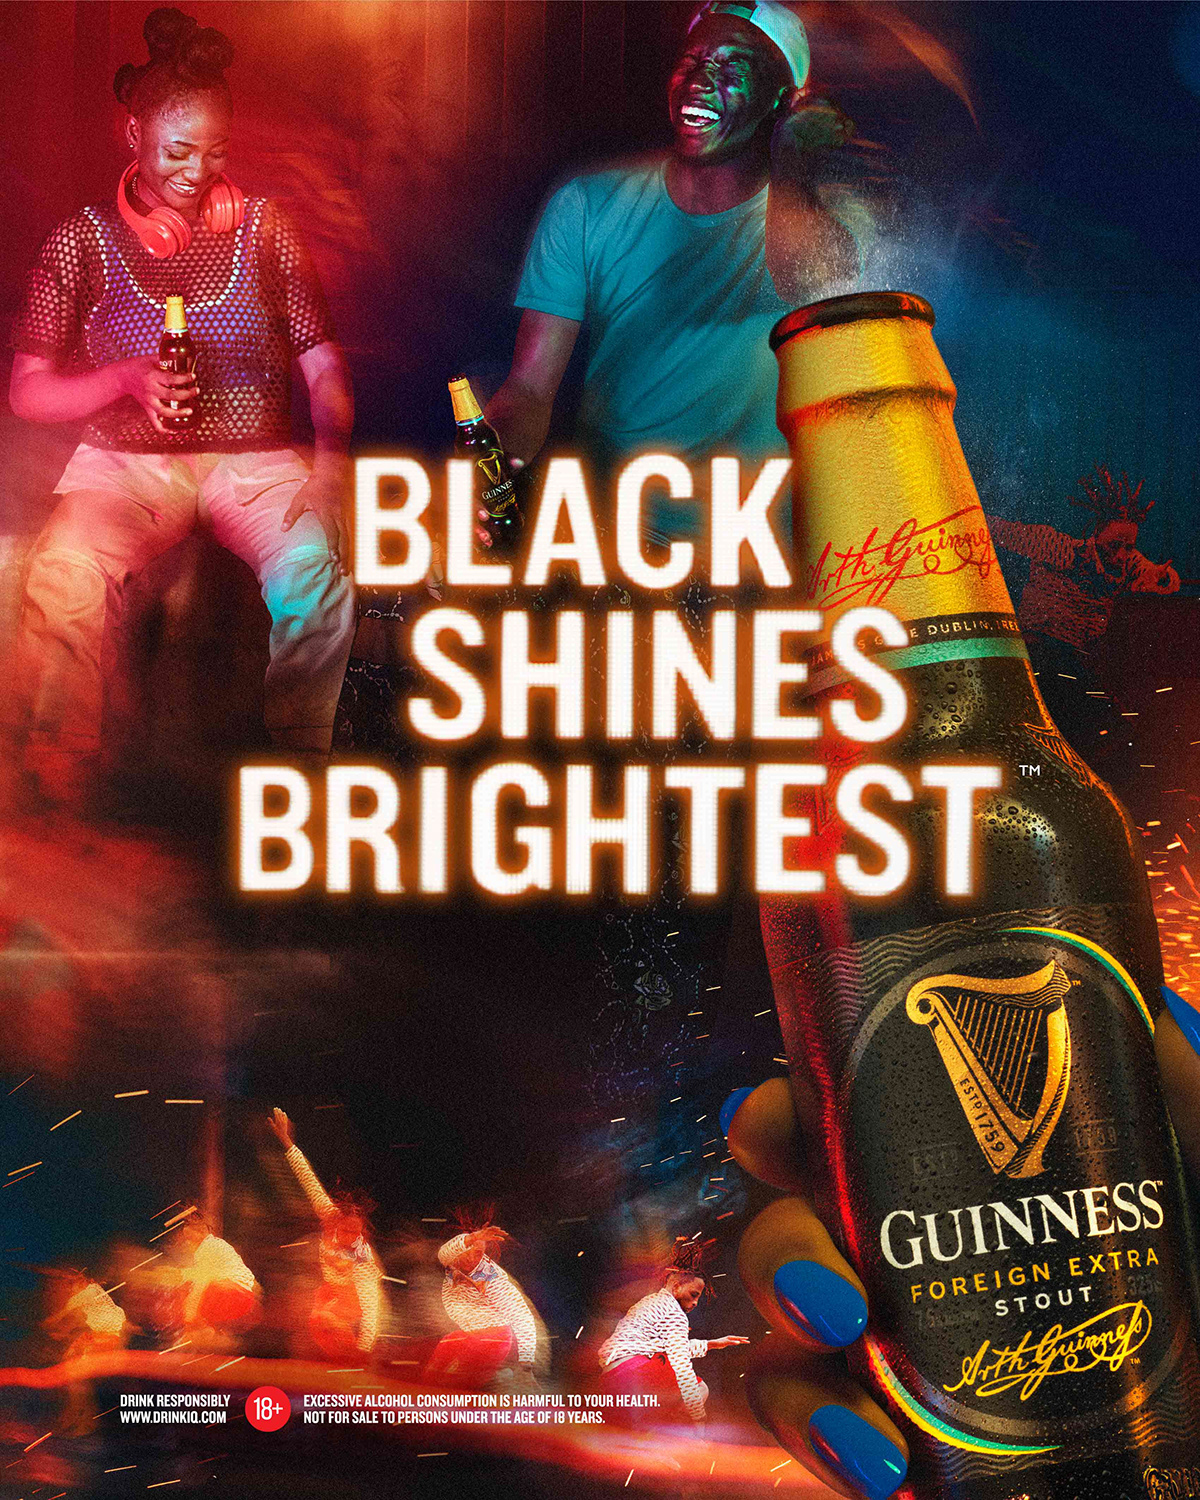 guinness beer Advertising  Graphic Designer visual identity marketing   Creative Direction  copywriting  art direction  campaign